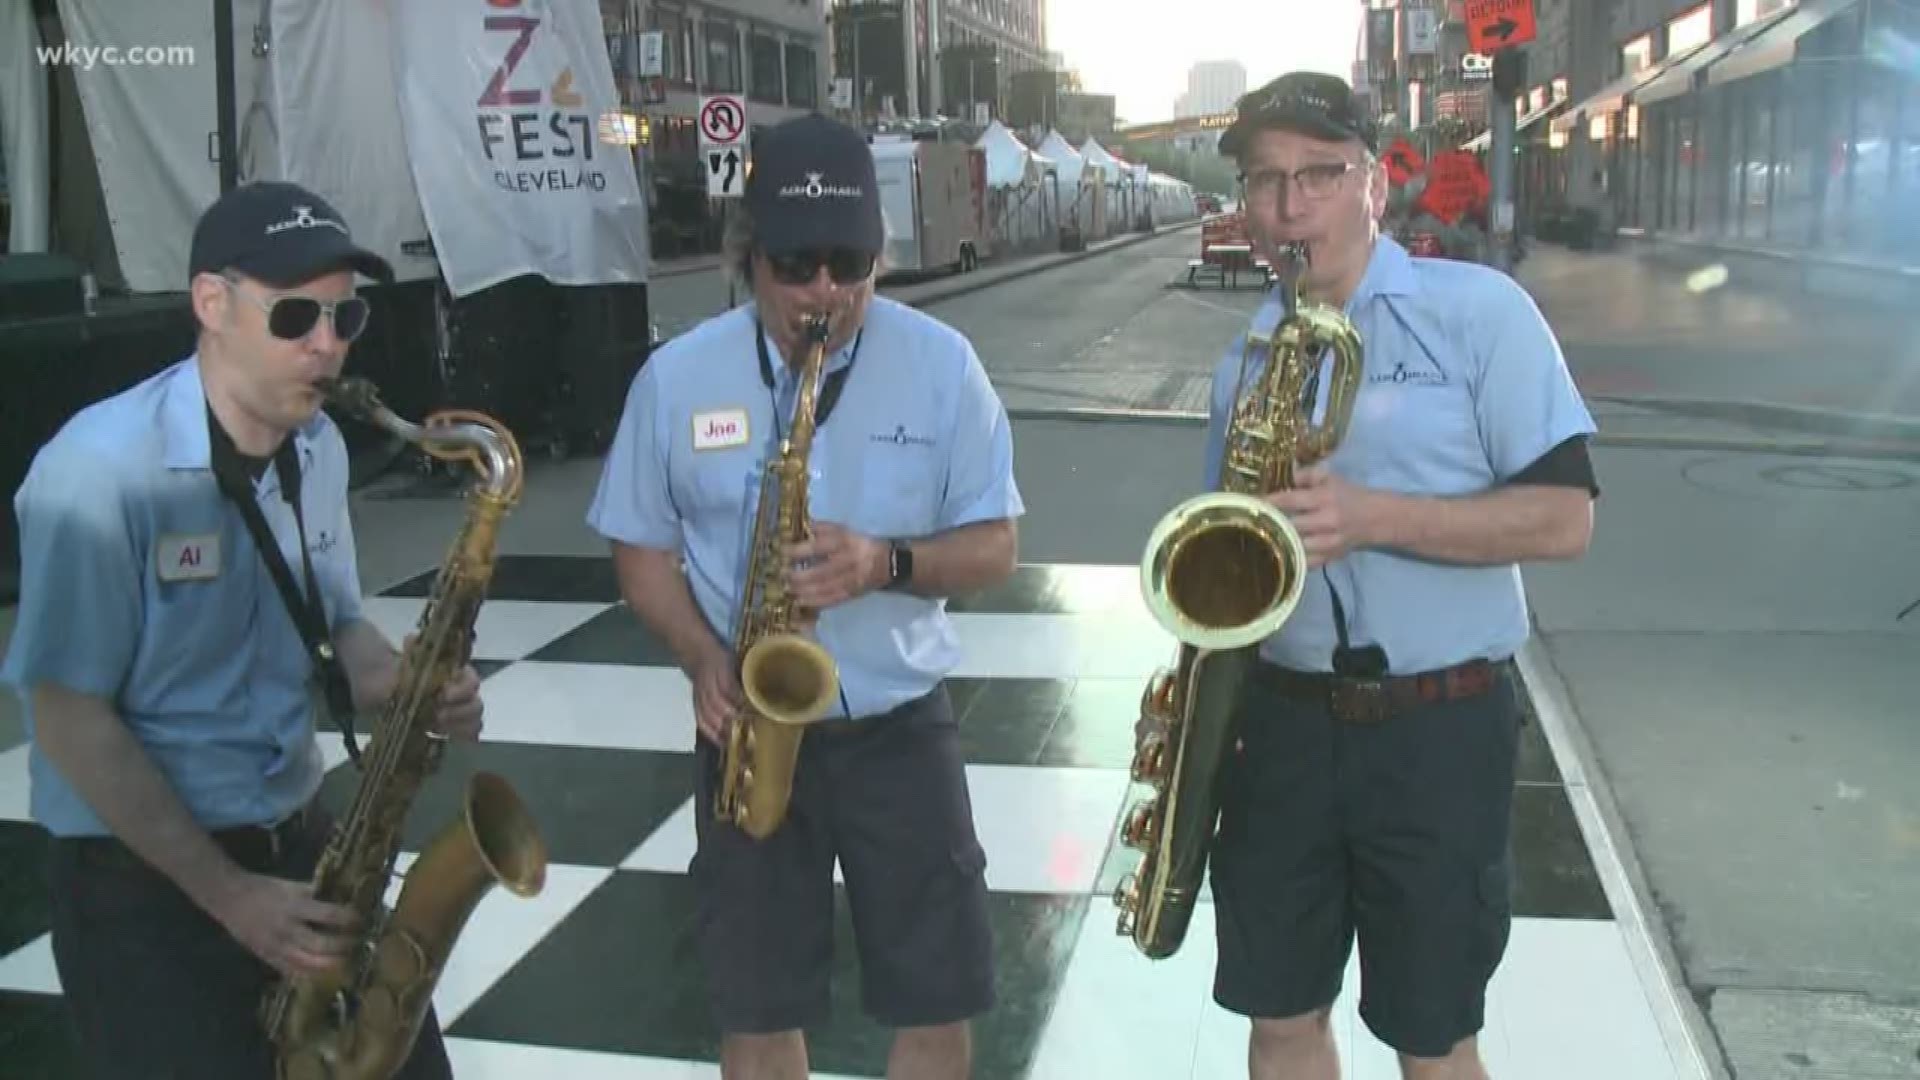 Tri-C Jazz Fest has kicked off at Cleveland's Playhouse Square. The event will celebrate jazz music all weekend.